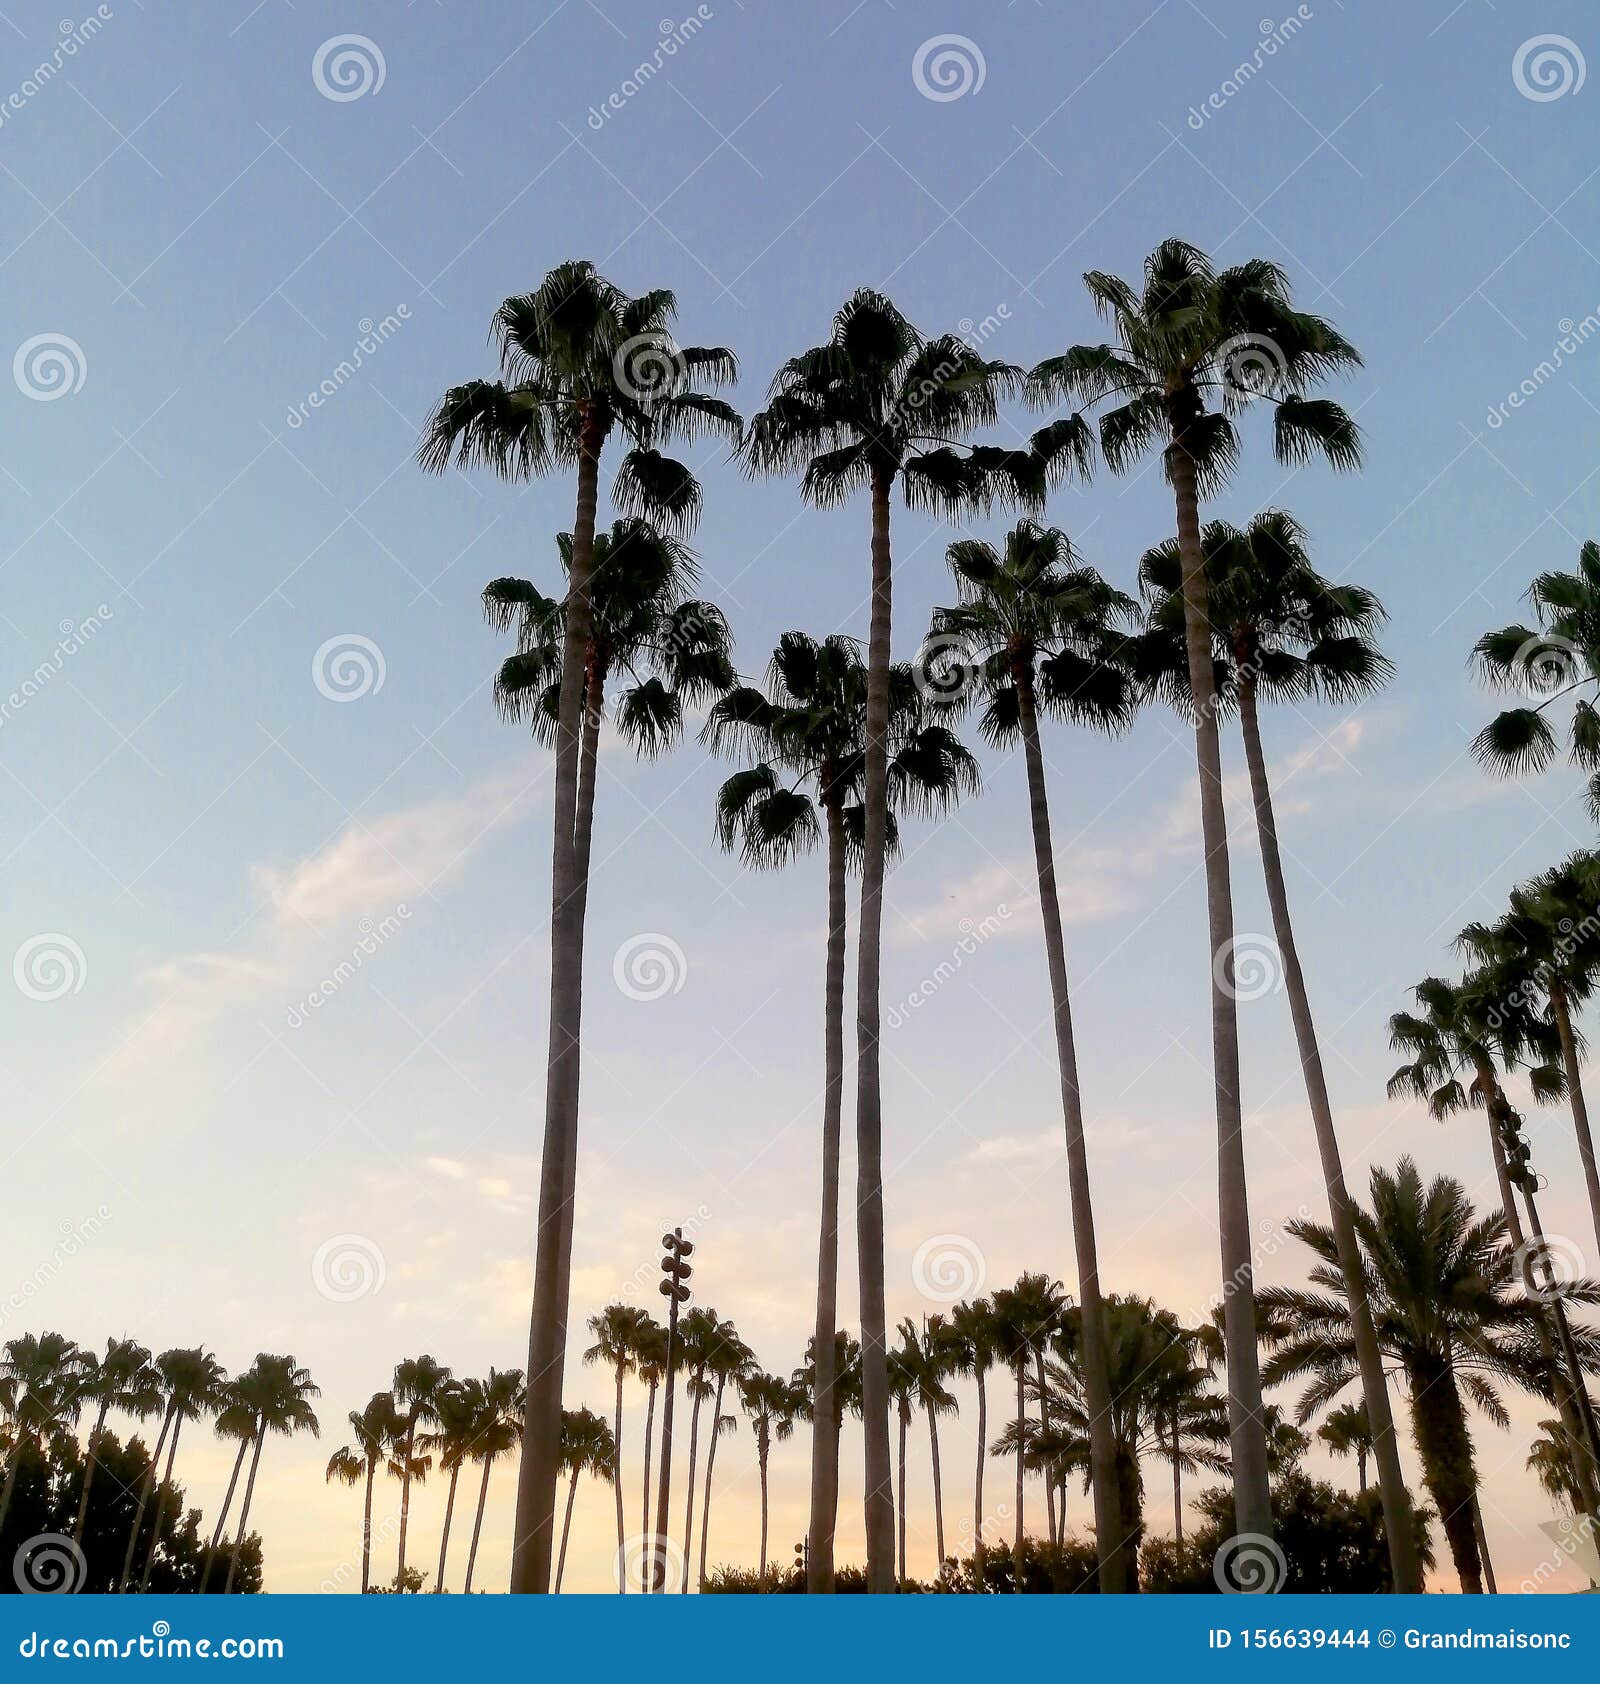 Palm trees in Florida editorial stock image. Image of family - 156639444